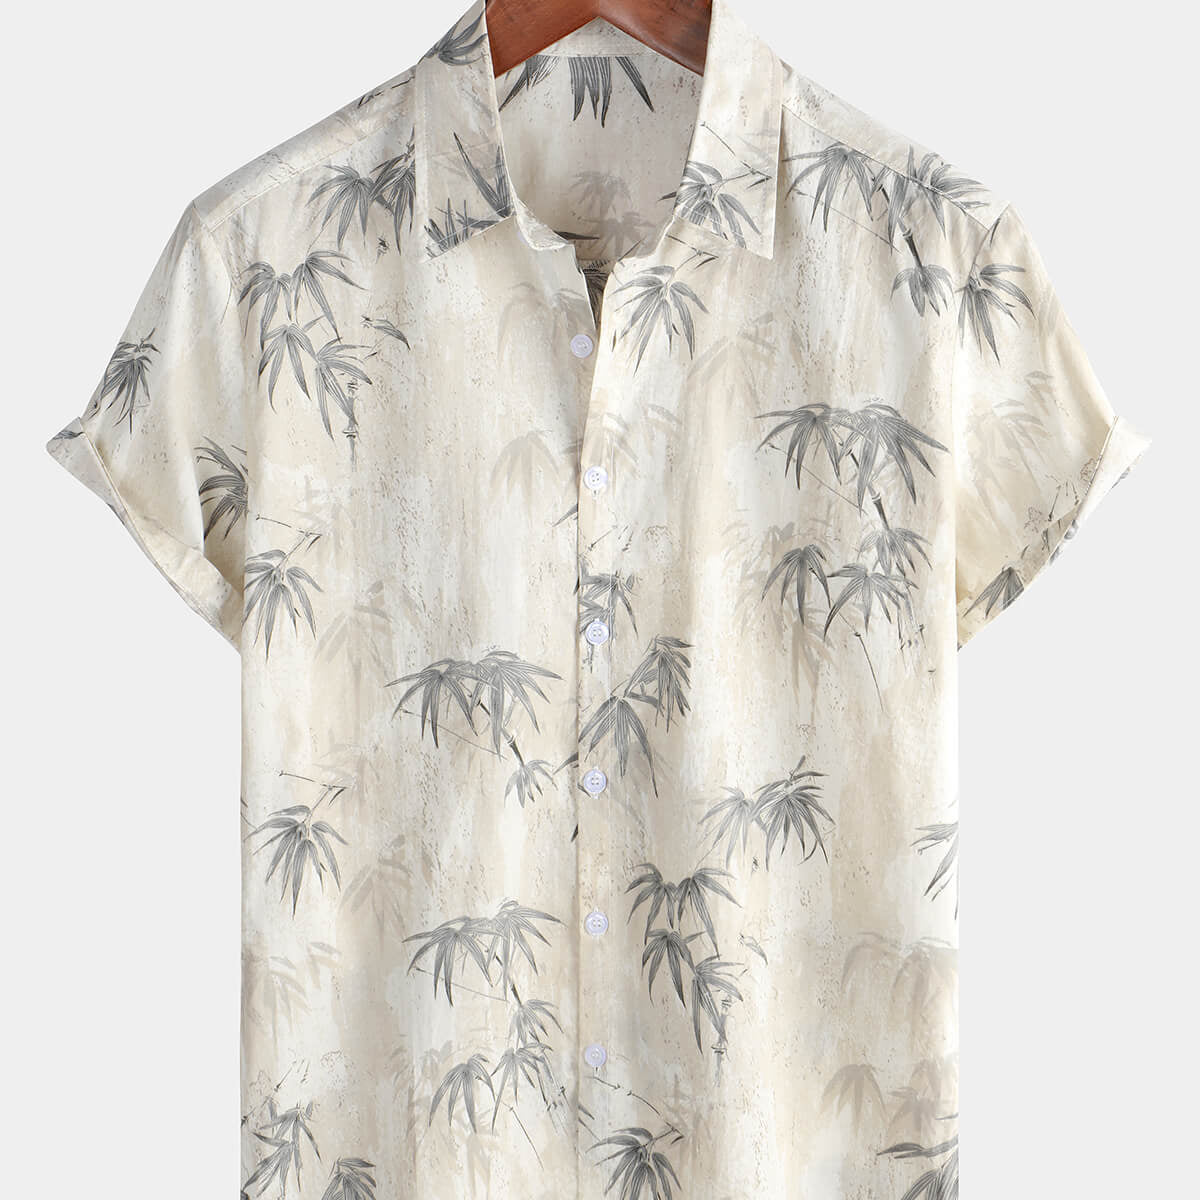 Men's Vintage Holiday Casual Summer Short Sleeve Button Up Shirt